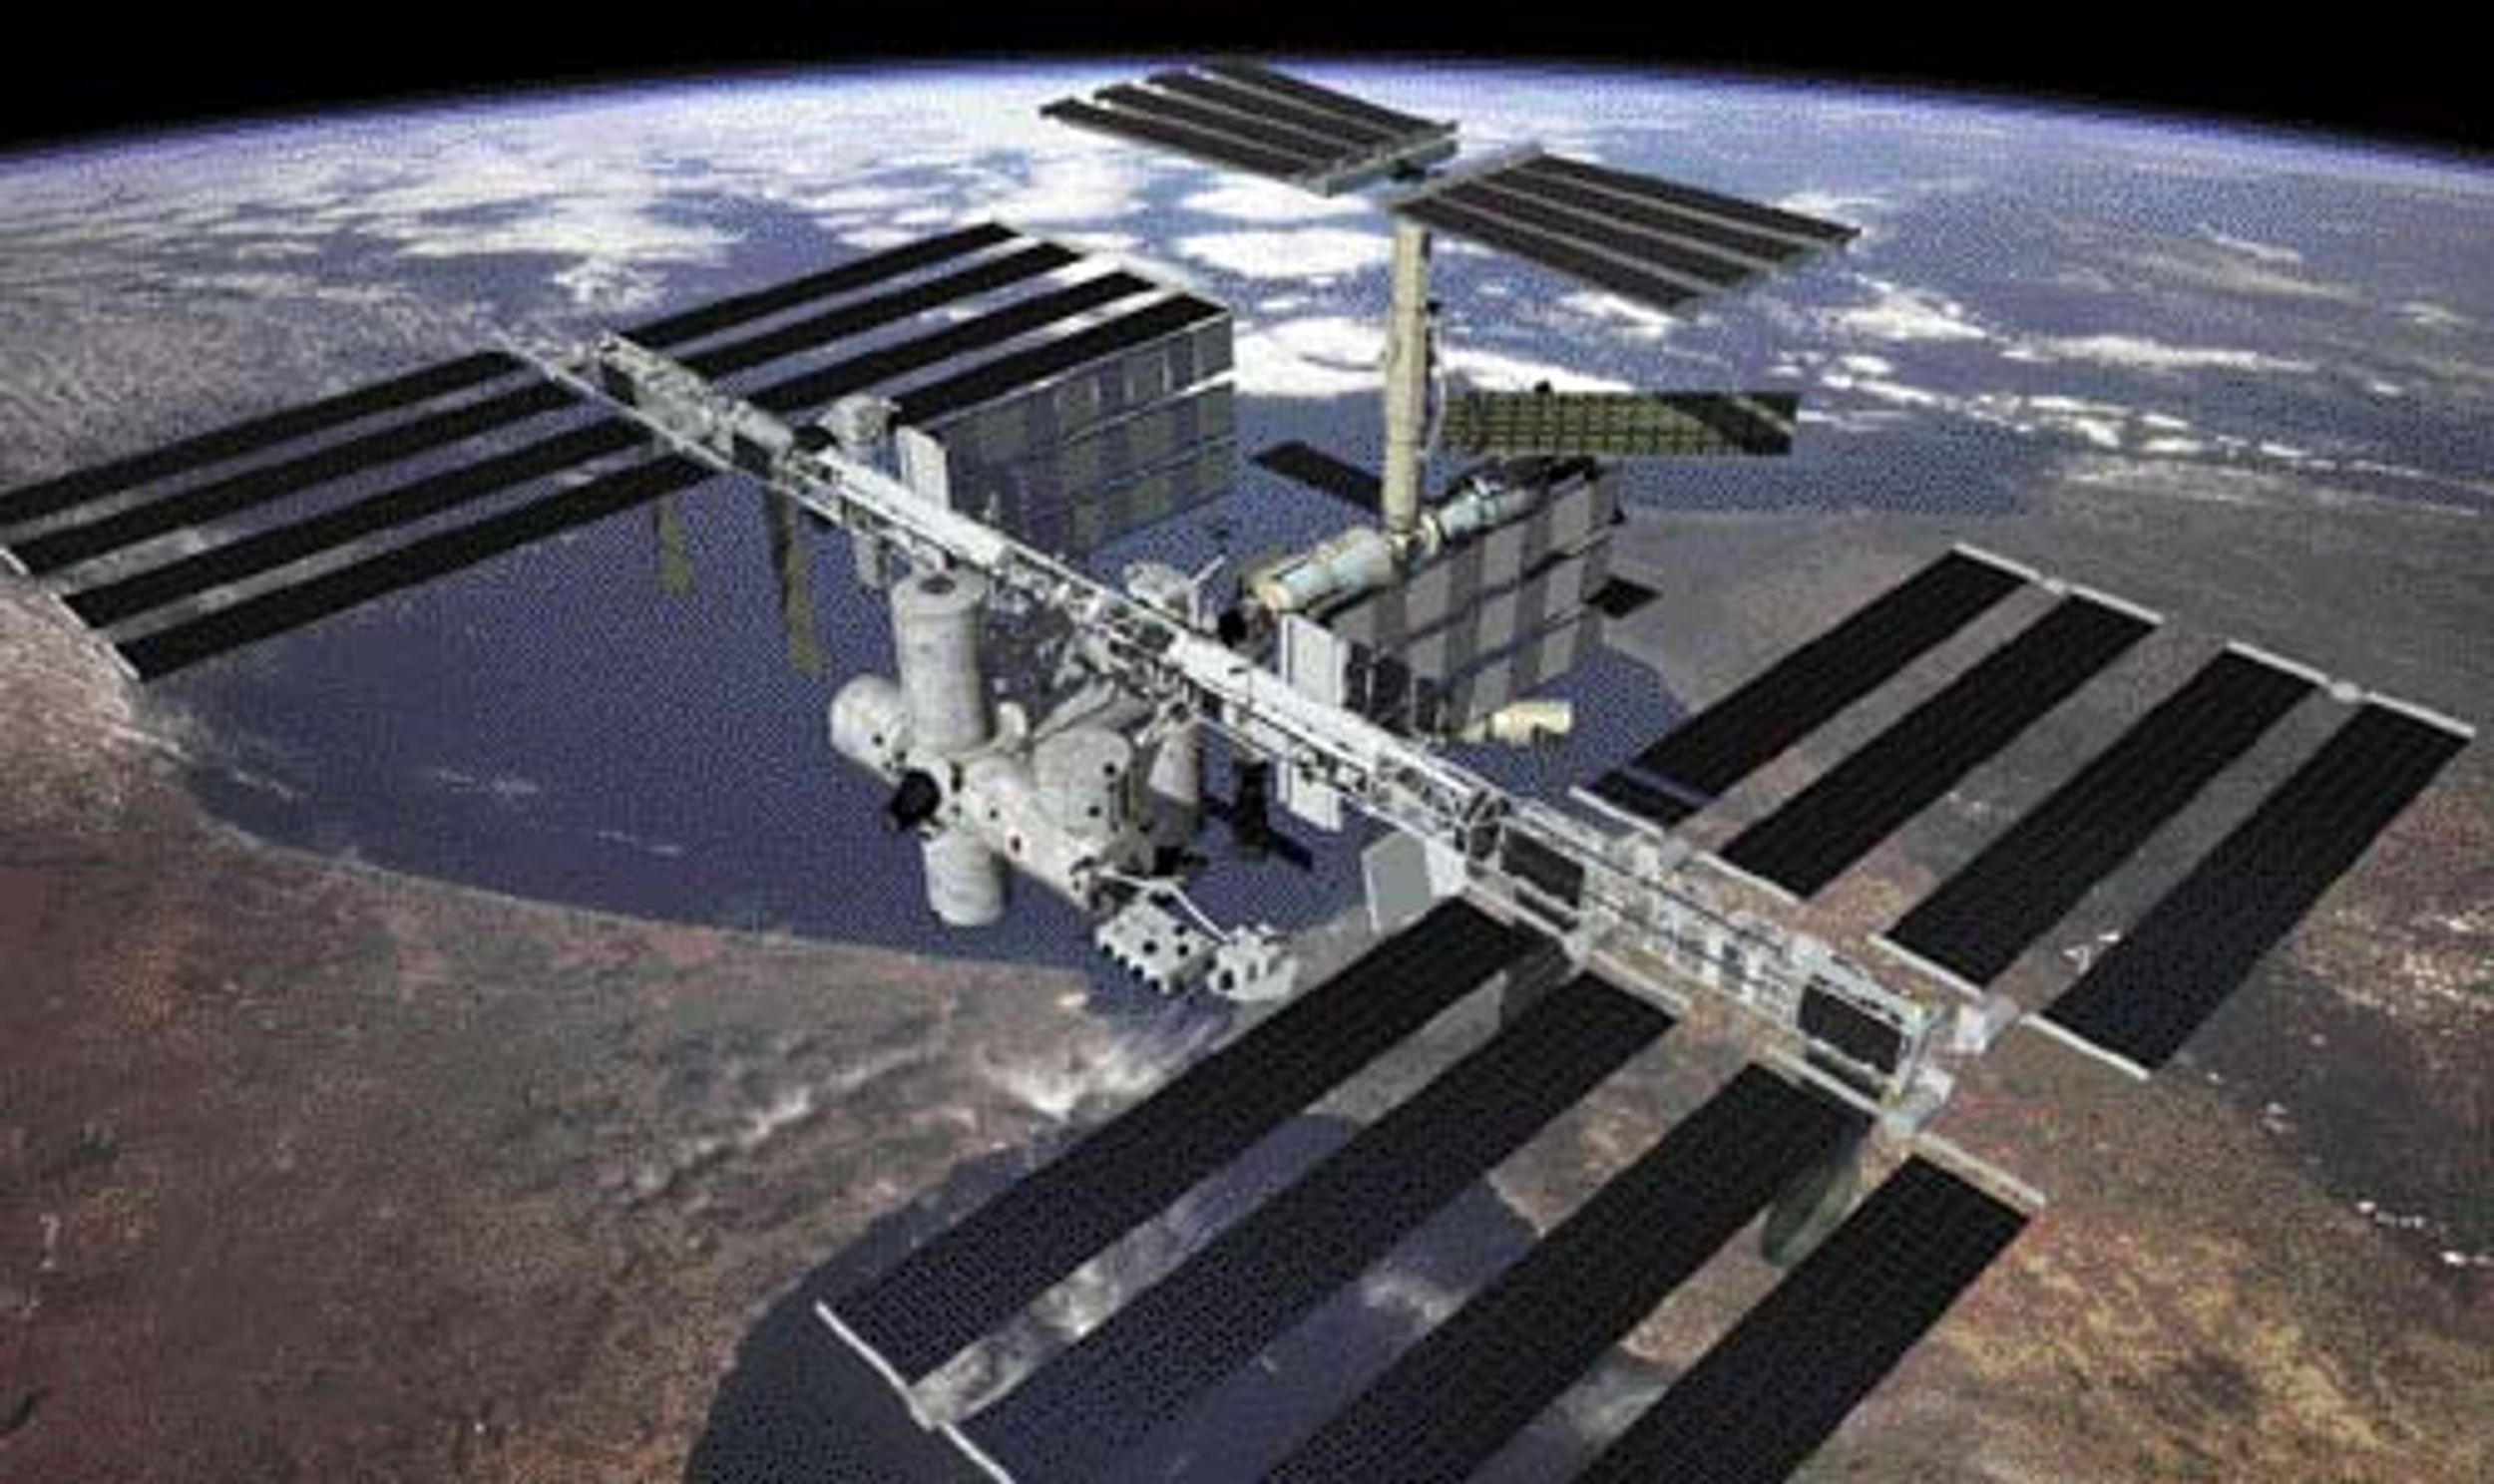 NASA Saves Big on Fuel in ISS Rotation